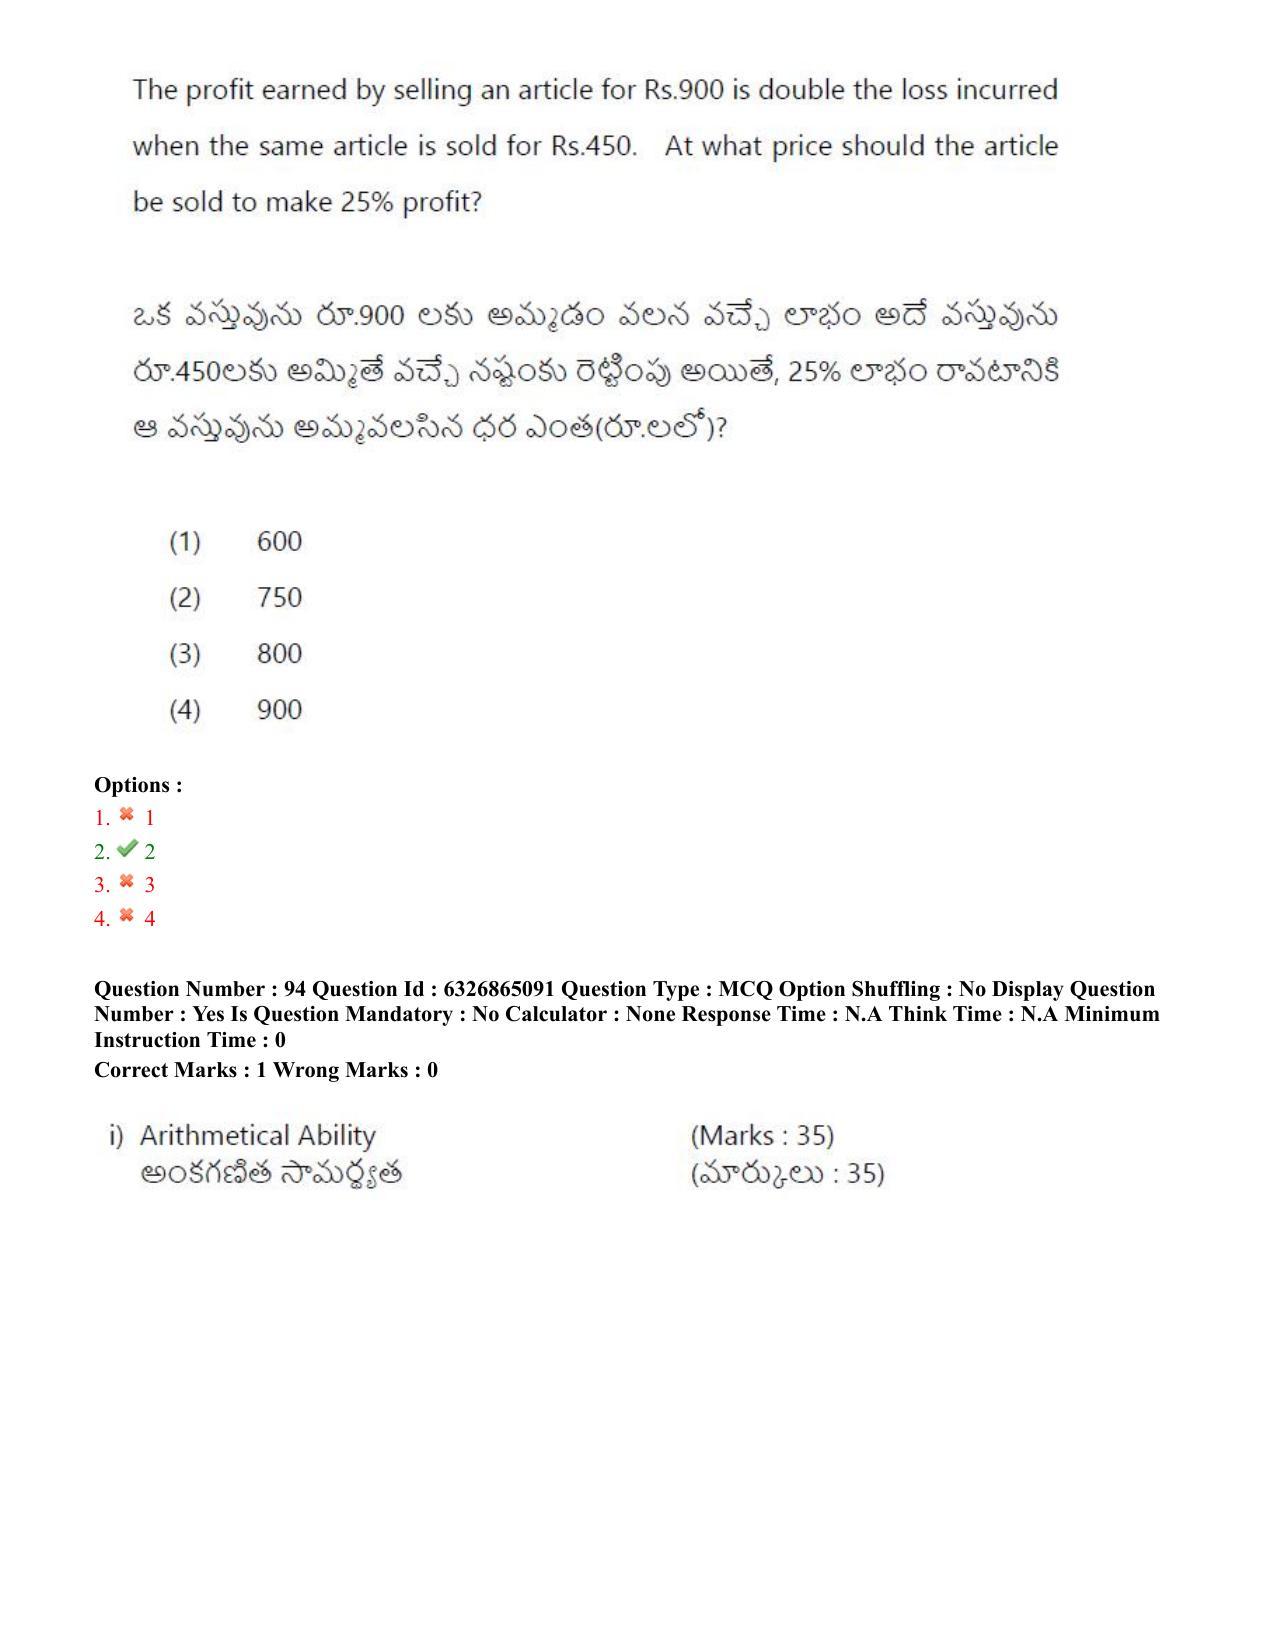 TS ICET 2022 Question Paper 2 - Jul 28, 2022	 - Page 88